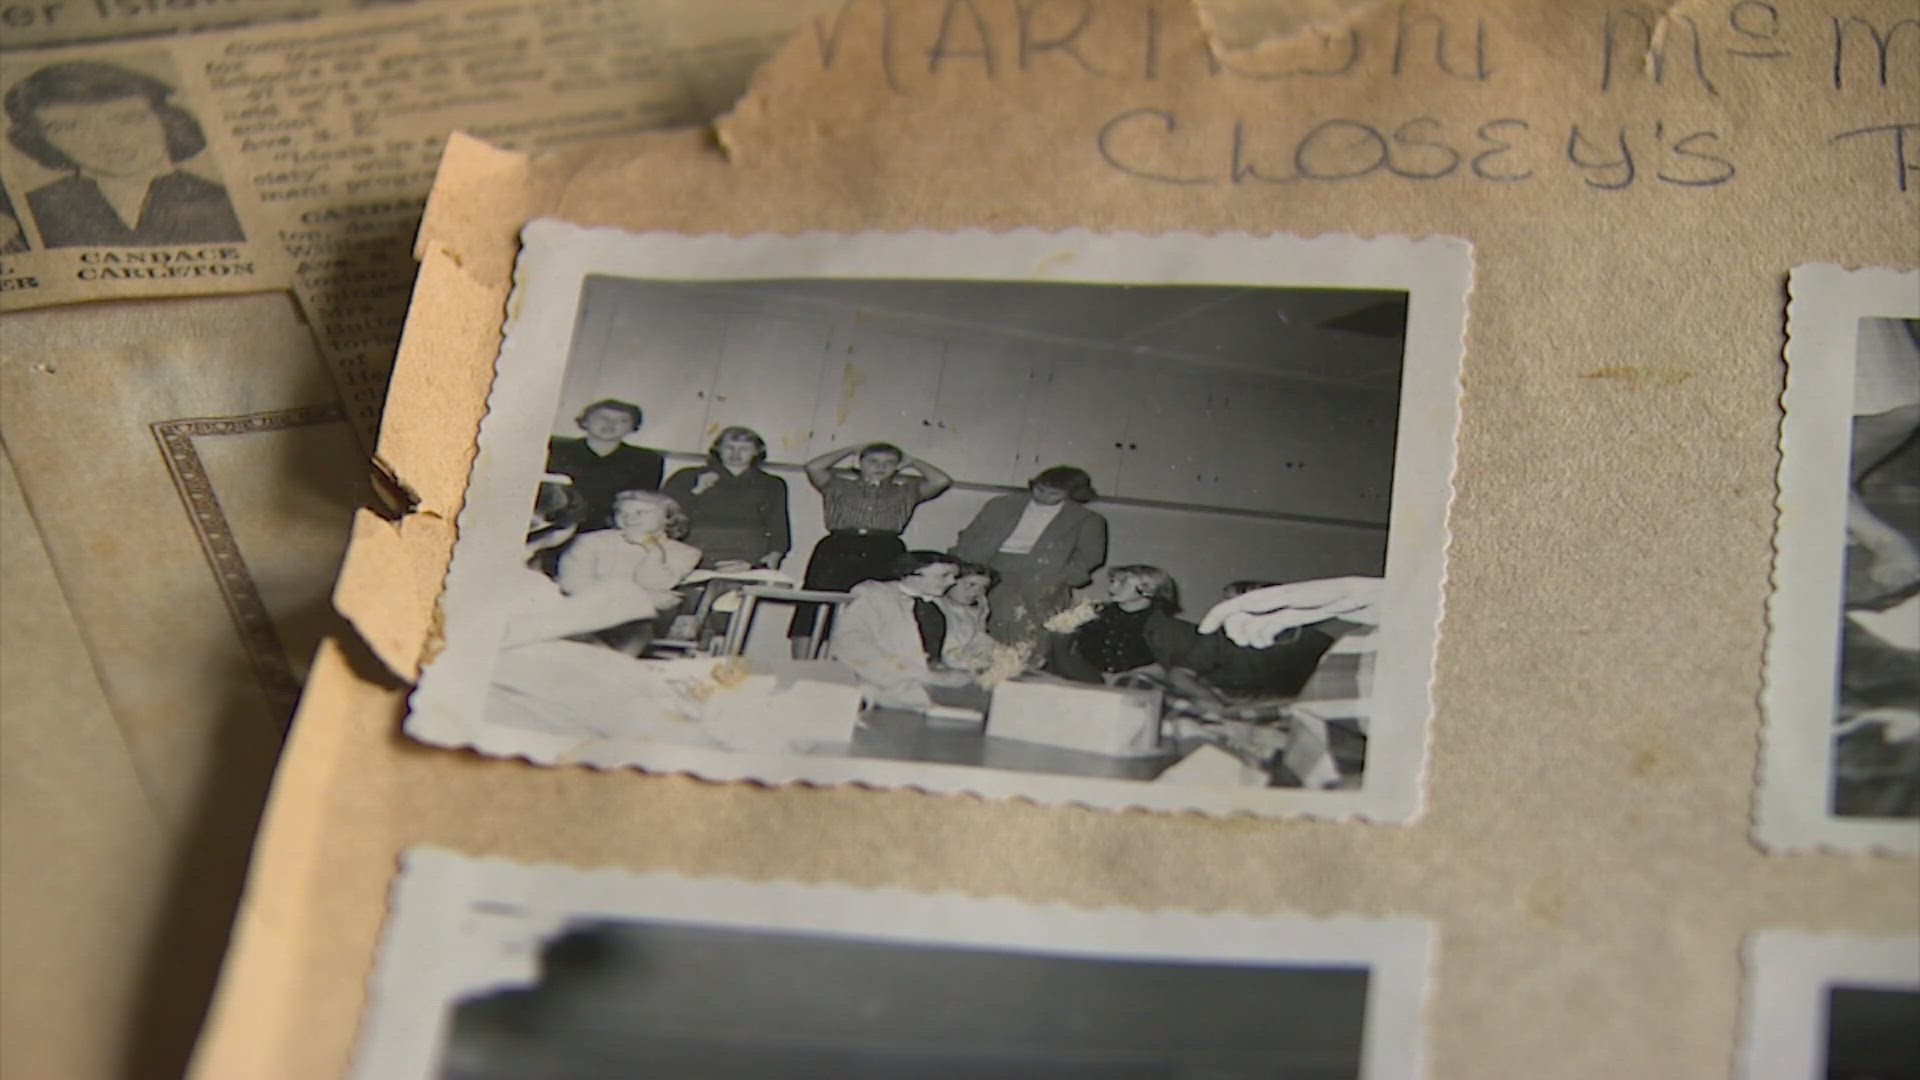 Megan Dascher-Watkins found photos of the former president's mother among her late mother's belongings.